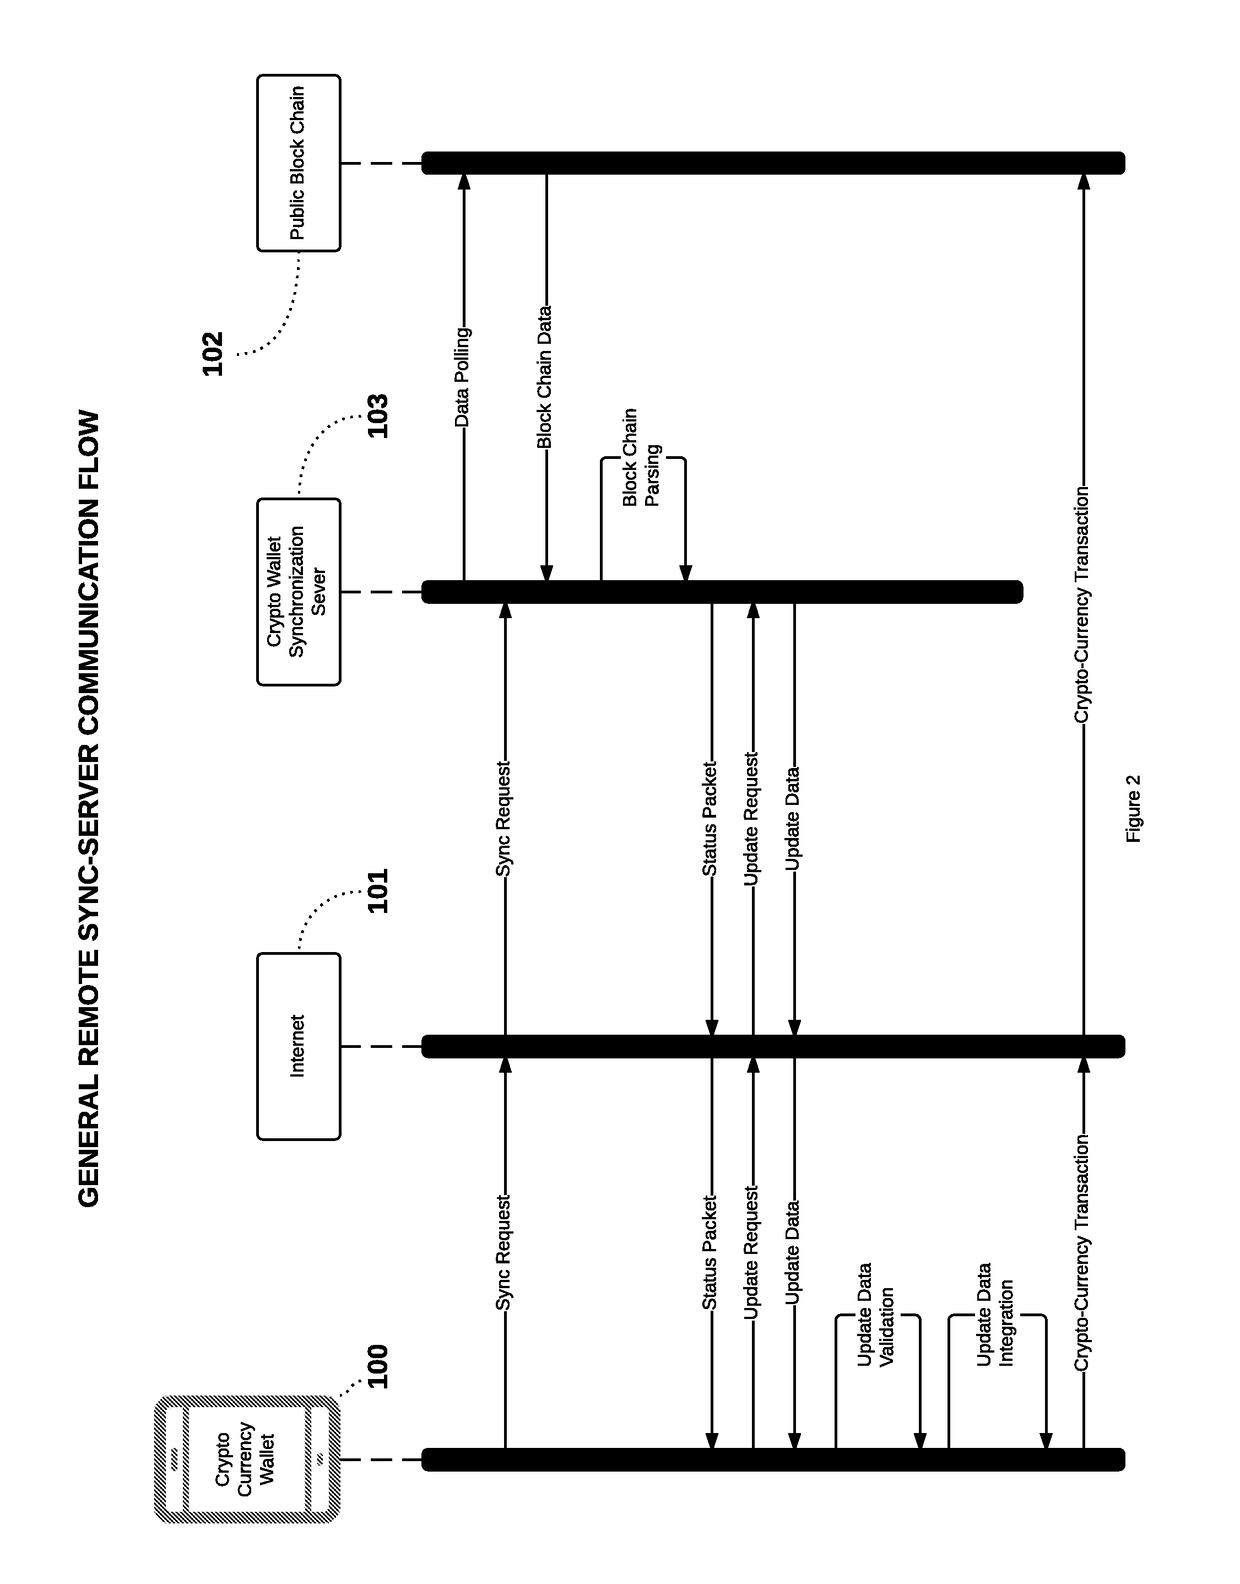 Low bandwidth crypto currency transaction execution and synchronization method and system